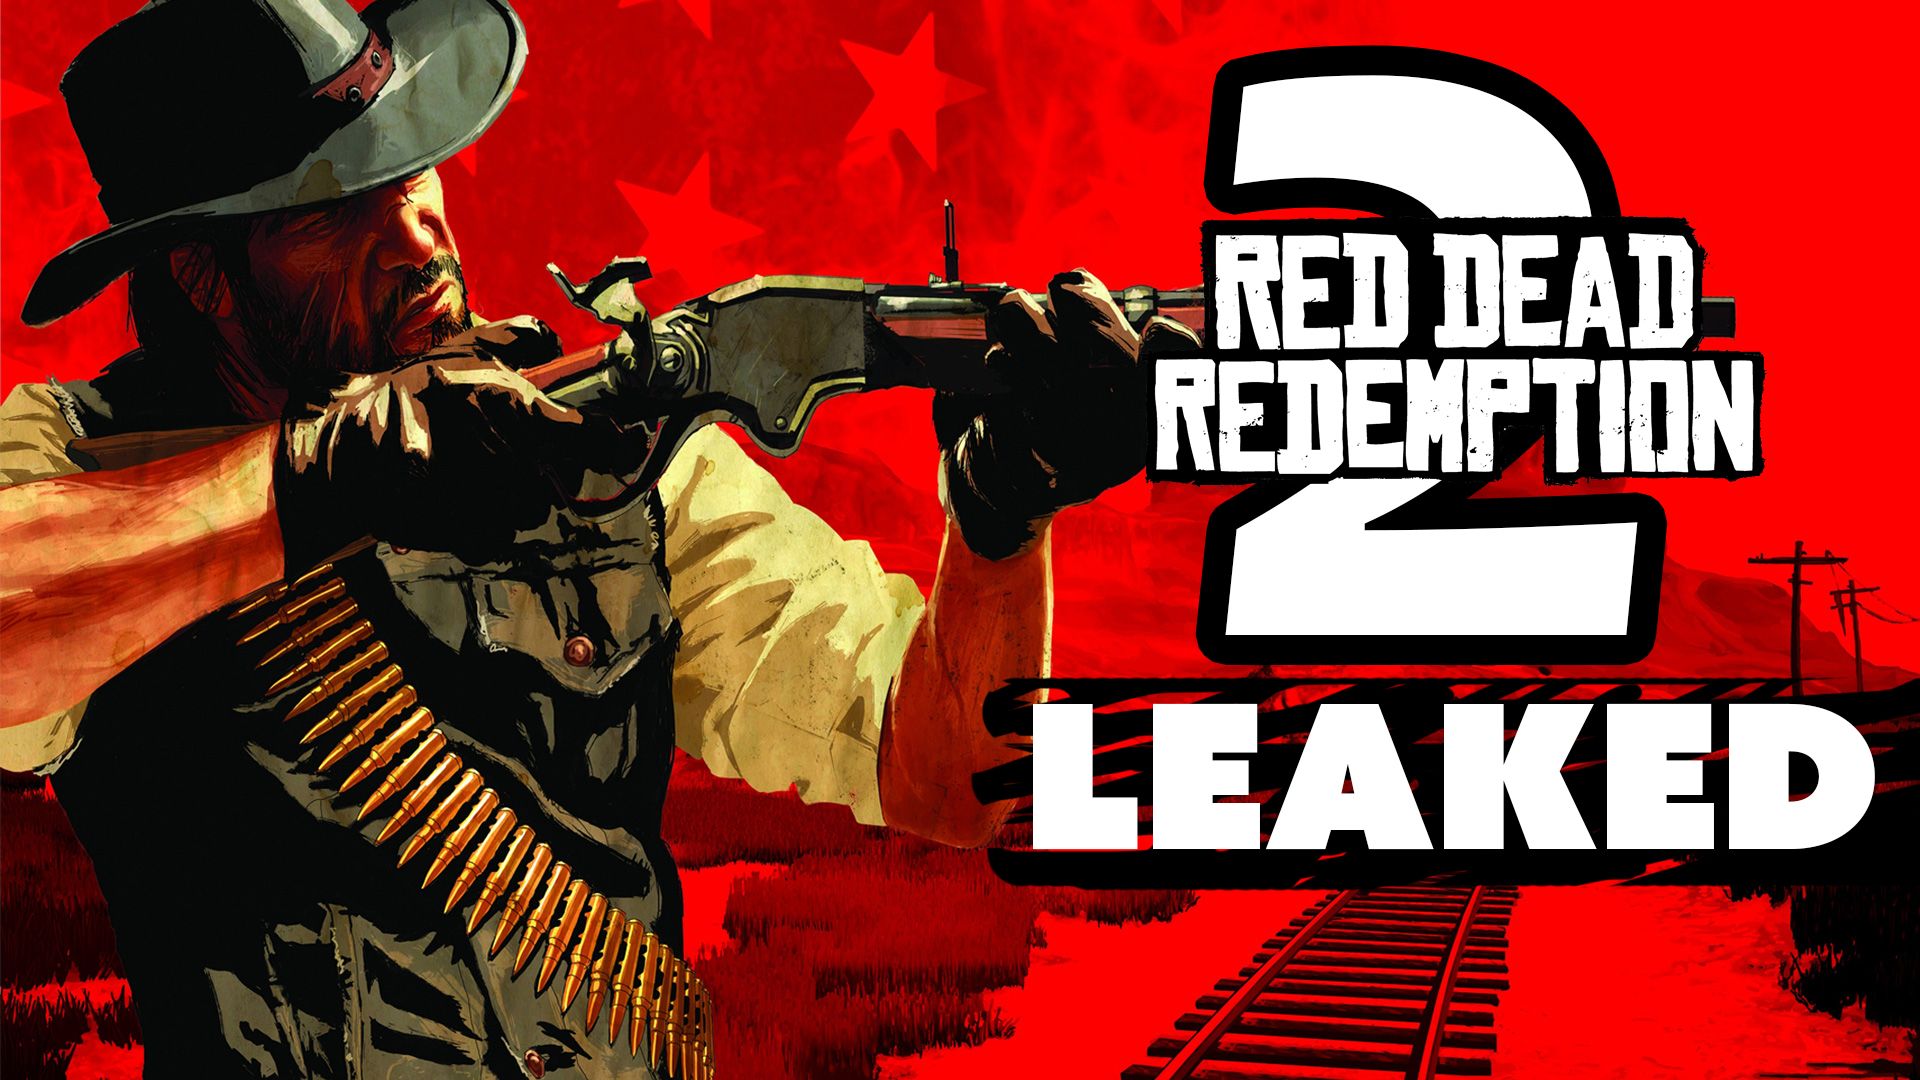 Red Dead Redemption обои. Red Dead Redemption 2 обои. Rdr 2 заставка. Дед Стронг.